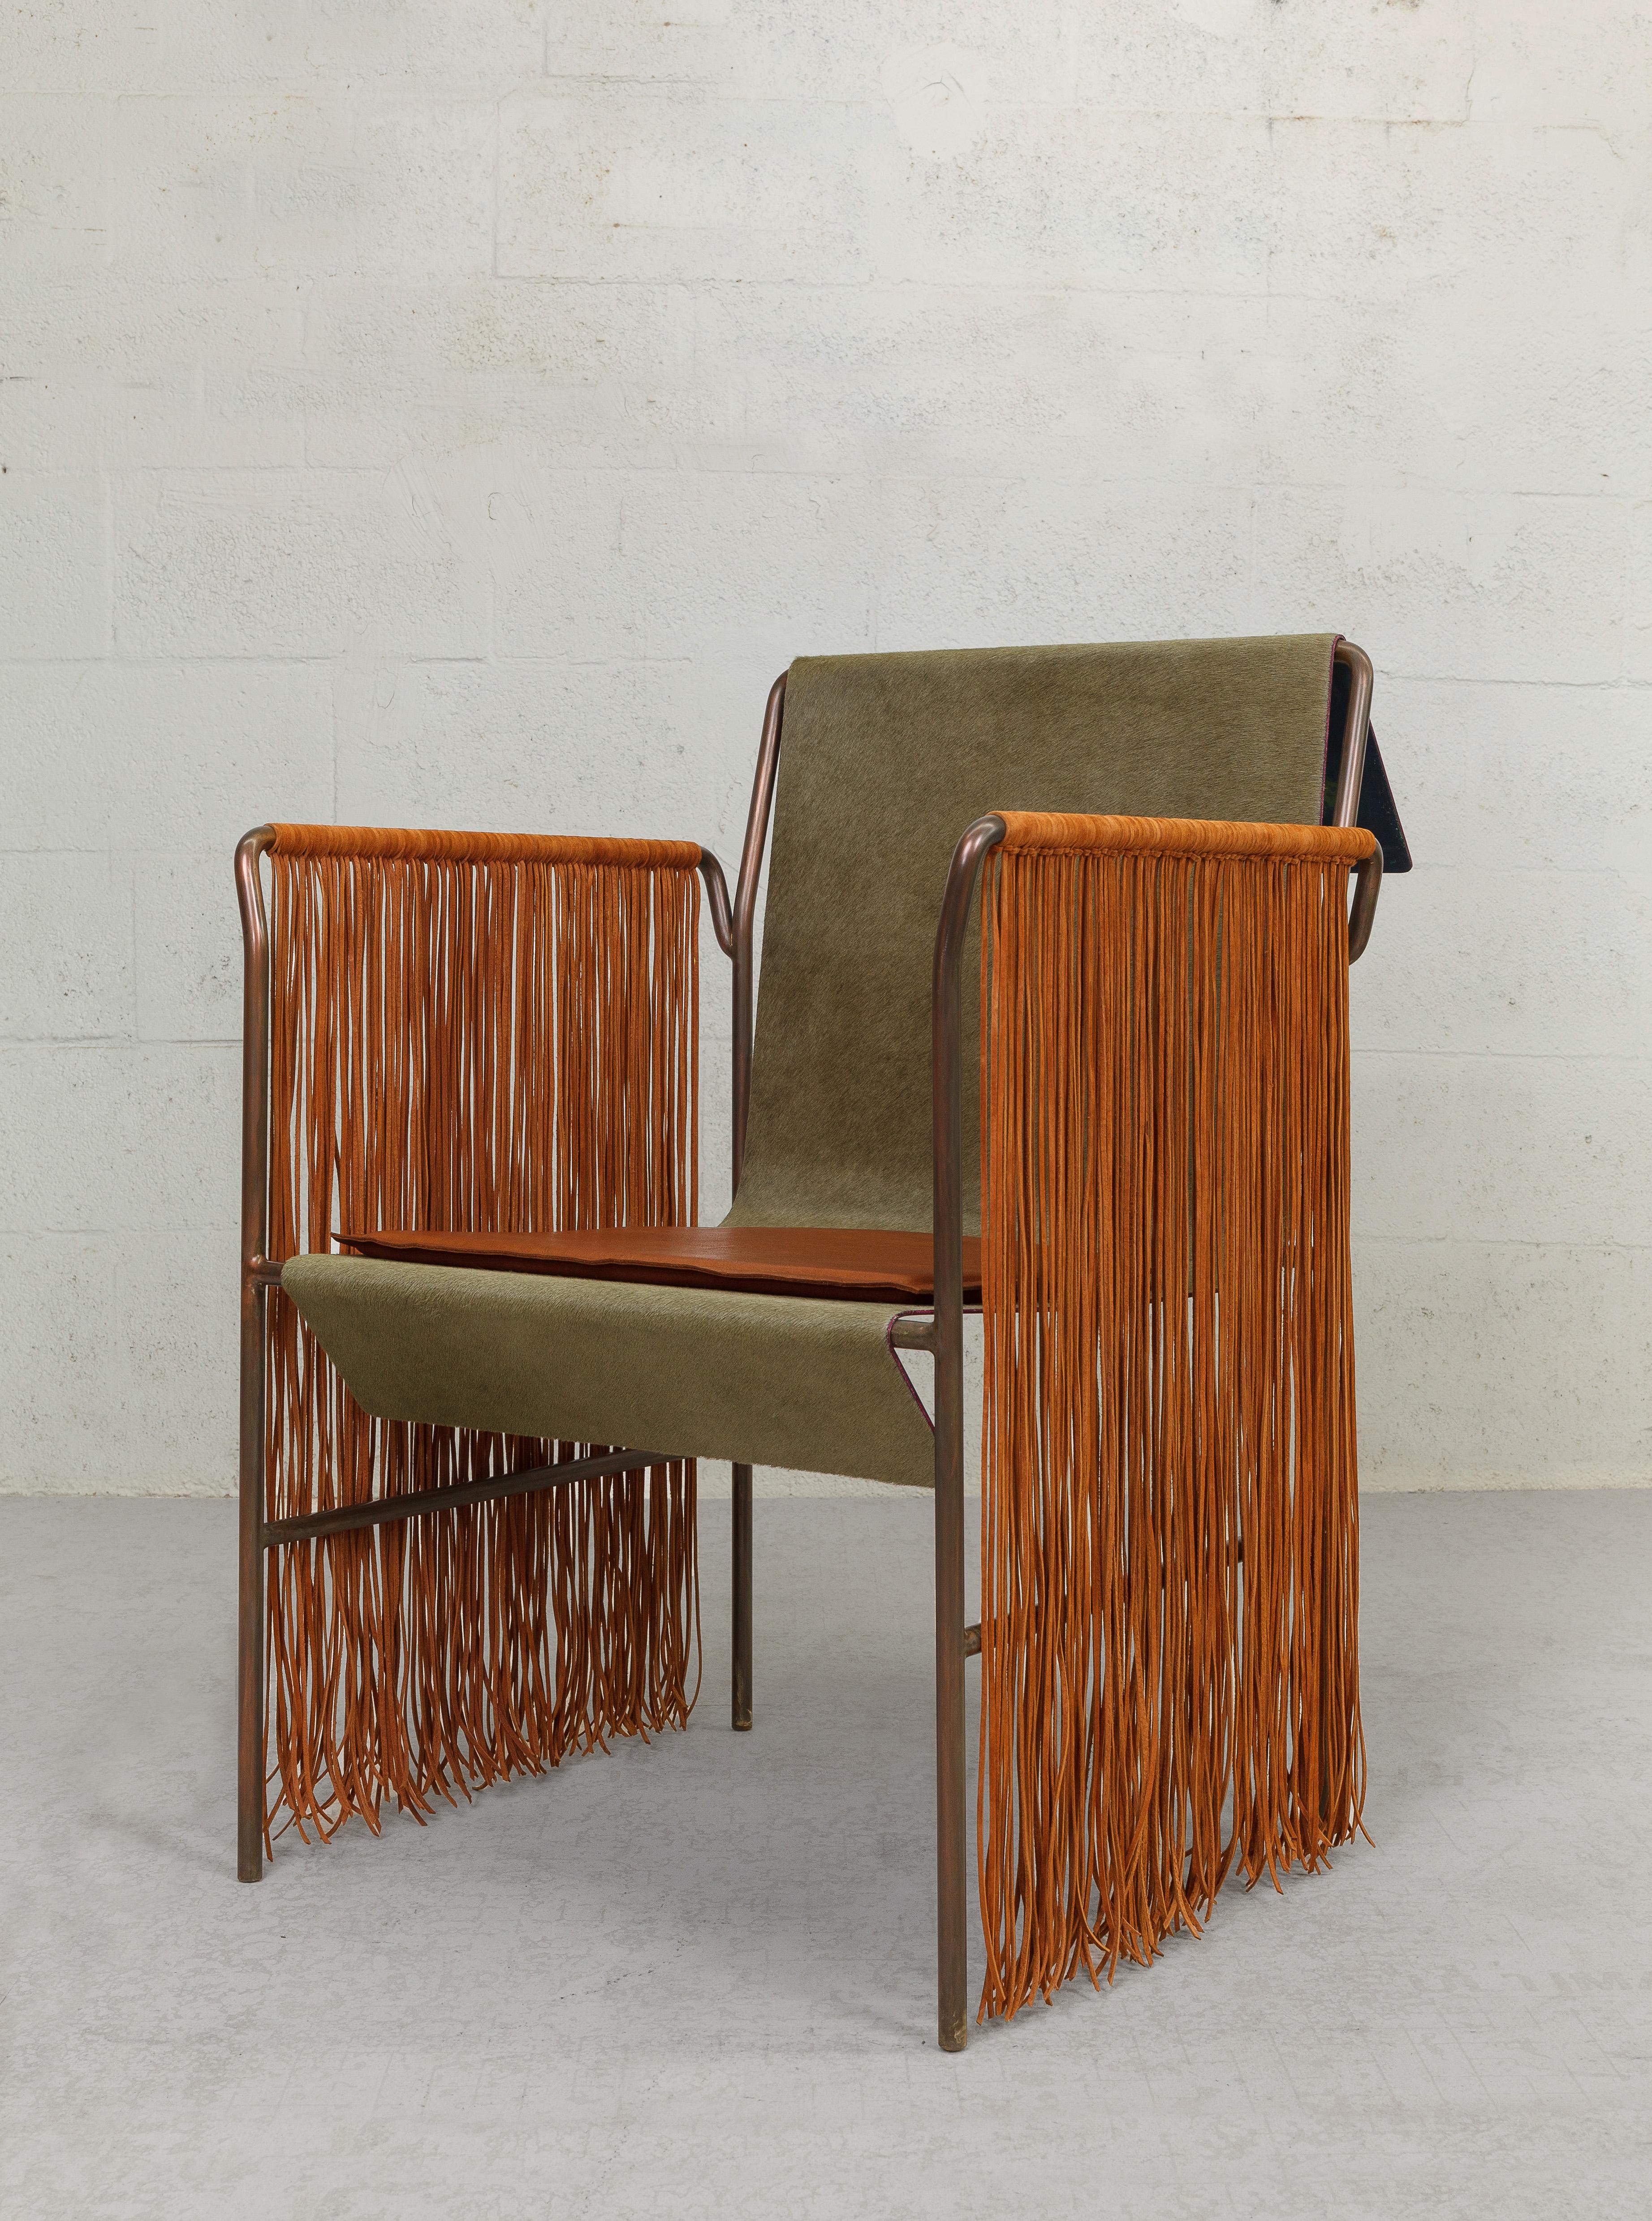 The contemporary Native chair design incorporates materials reminiscent of tribal Indian cultures akin to a modern throne-like chair made from a combination of leather, lace fringe, and hair-on-hide. The chair features a sturdy frame made from solid